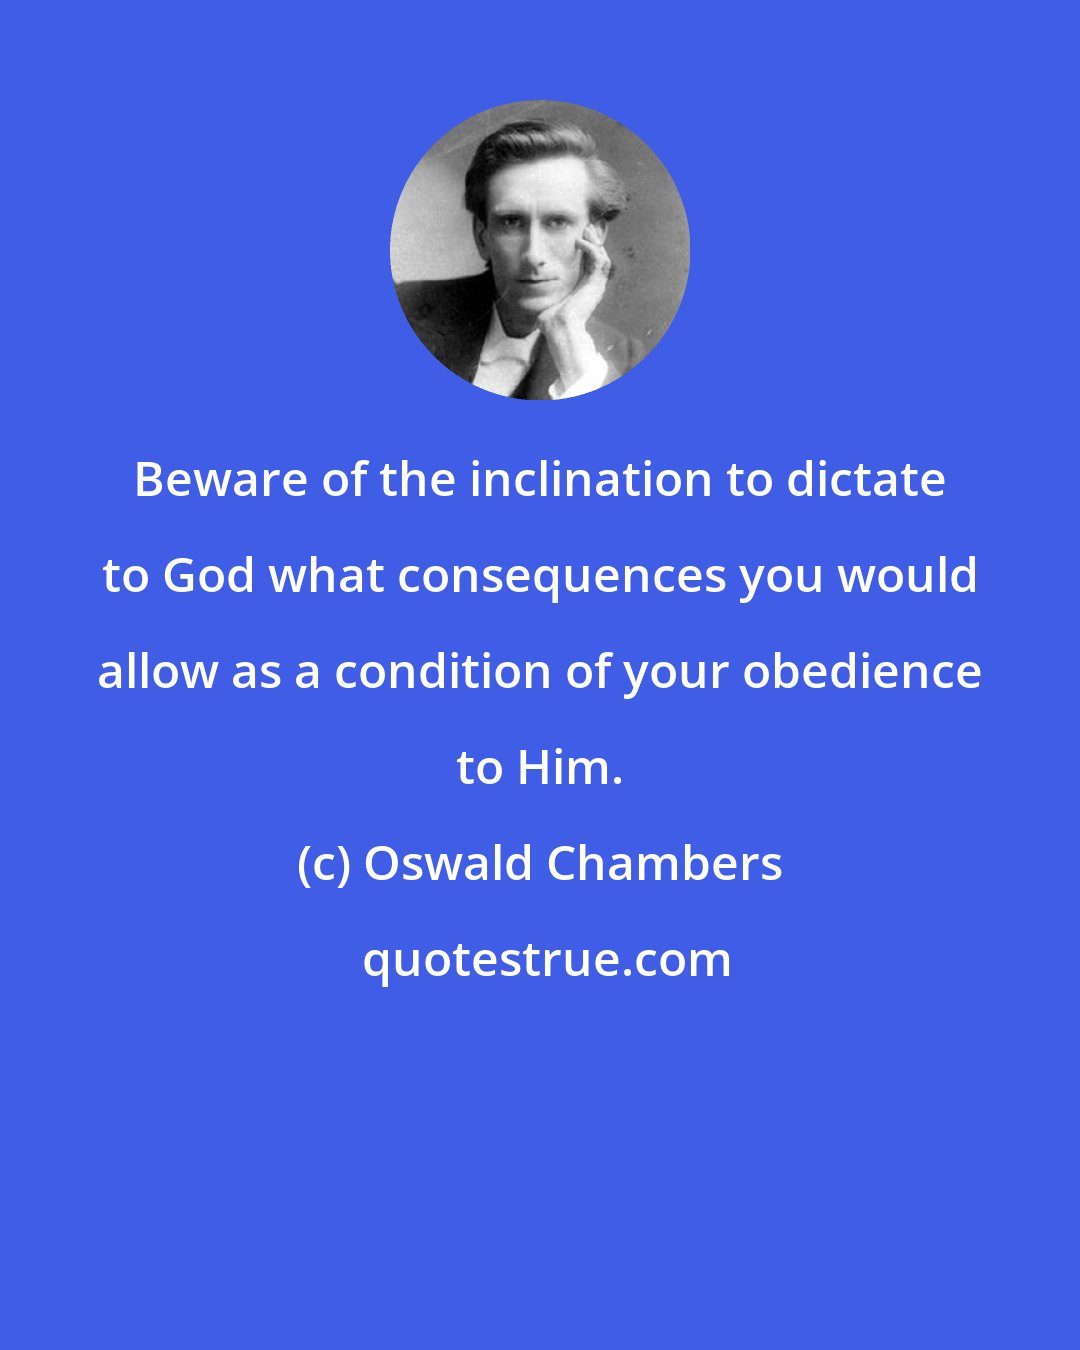 Oswald Chambers: Beware of the inclination to dictate to God what consequences you would allow as a condition of your obedience to Him.